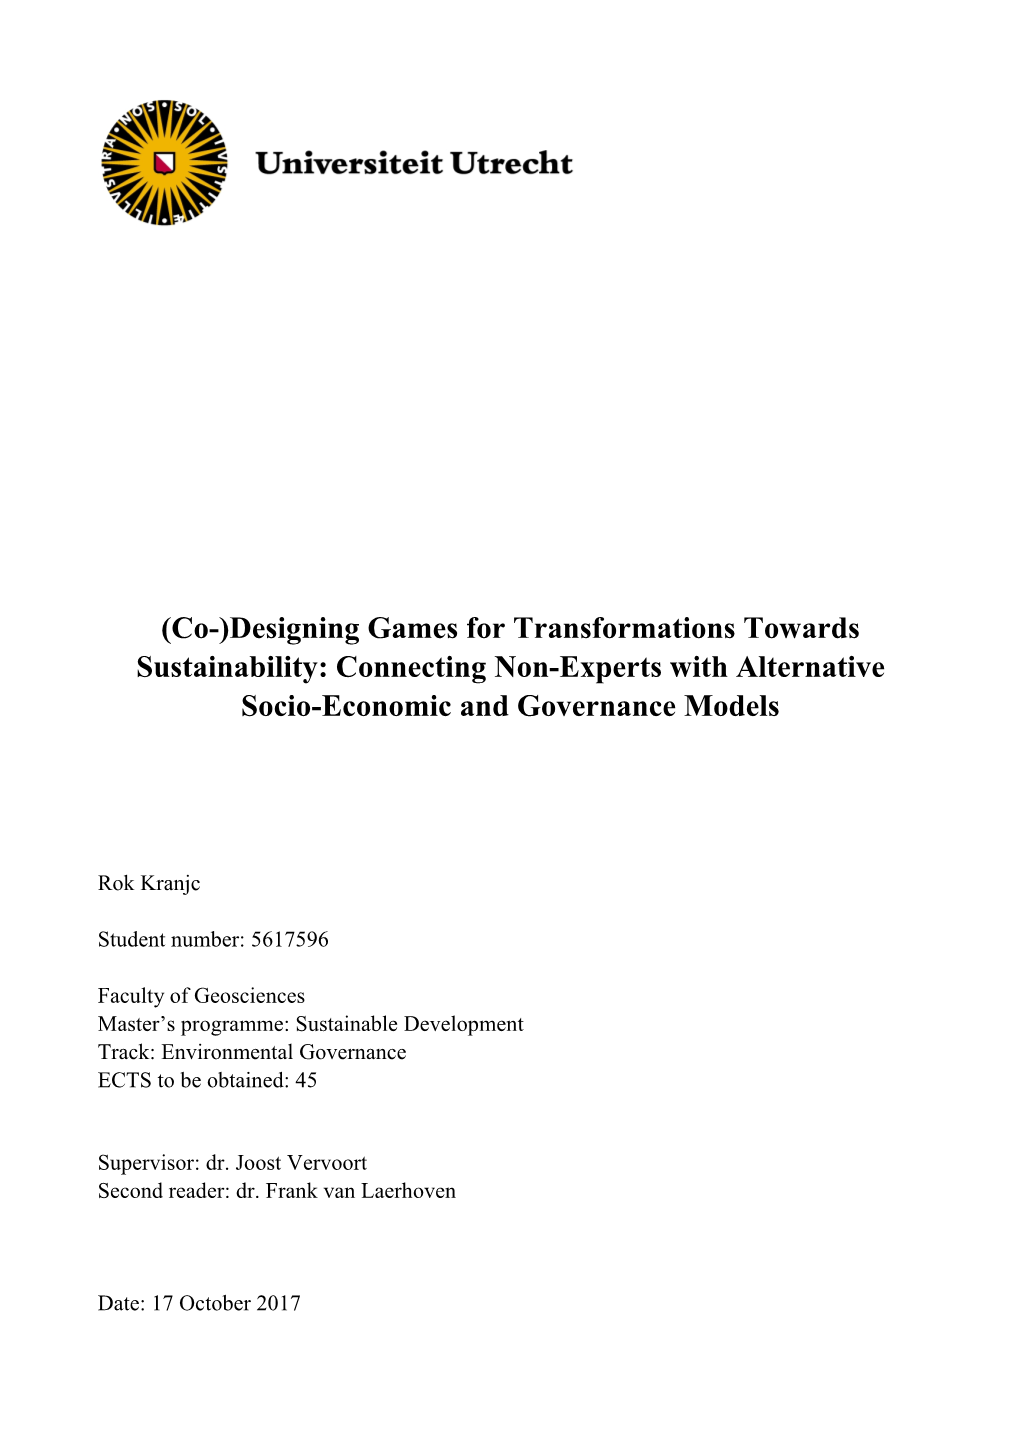 (Co-)Designing Games for Transformations Towards Sustainability: Connecting Non-Experts with Alternative Socio-Economic and Governance Models